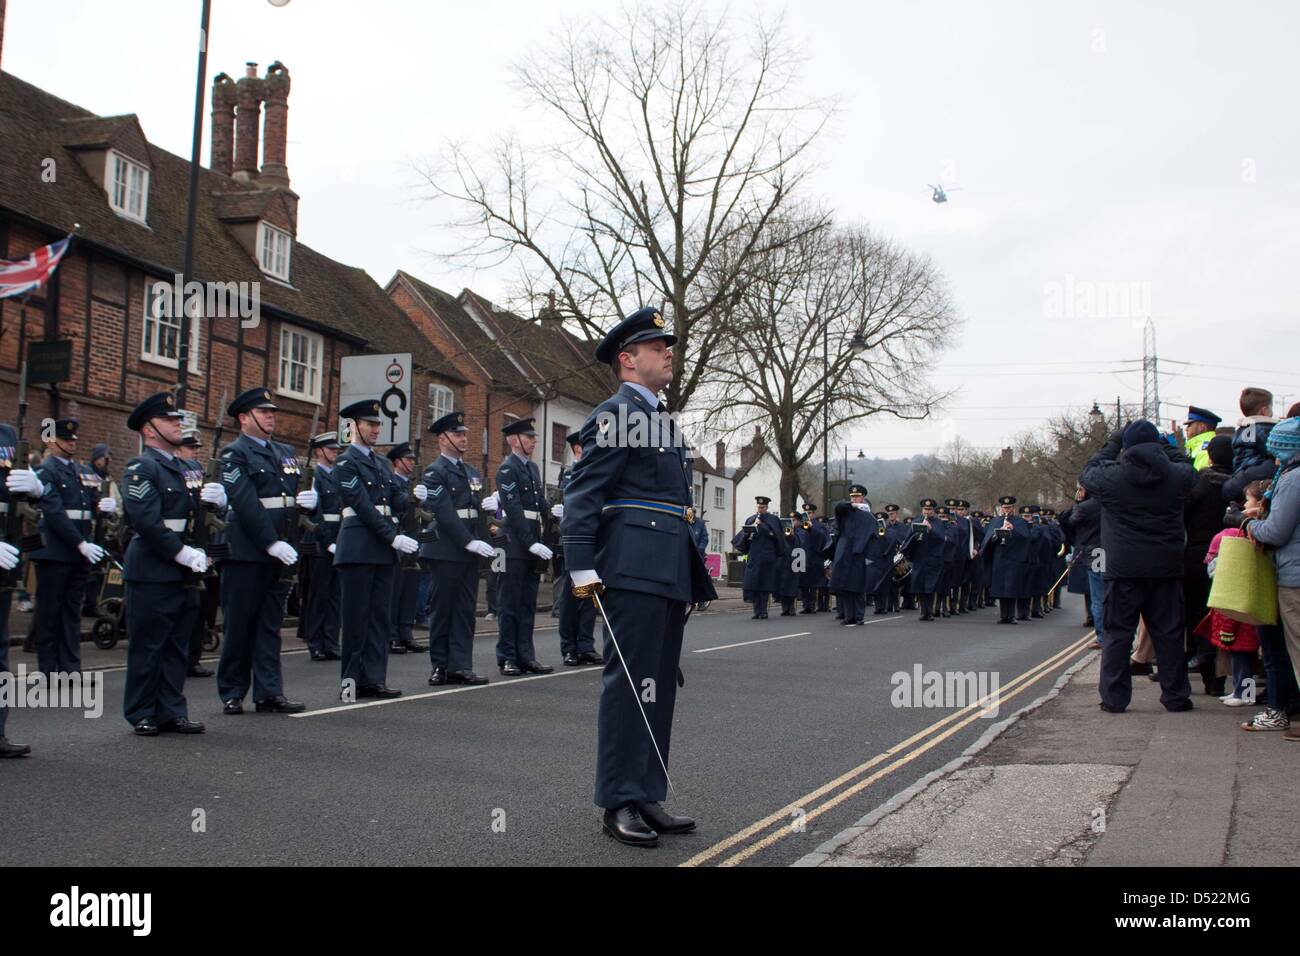 Wendover, UK. 22nd March 2013. RAF Halton Freedom of the Vale Parade. The parade will celebrates the granting of the Freedom of Entry to Aylesbury Vale District Council. A ‘Freedom of Entry’ is the highest tribute that can be paid to any military organisation or service. Credit:  Andrew Spiers / Alamy Live News Stock Photo